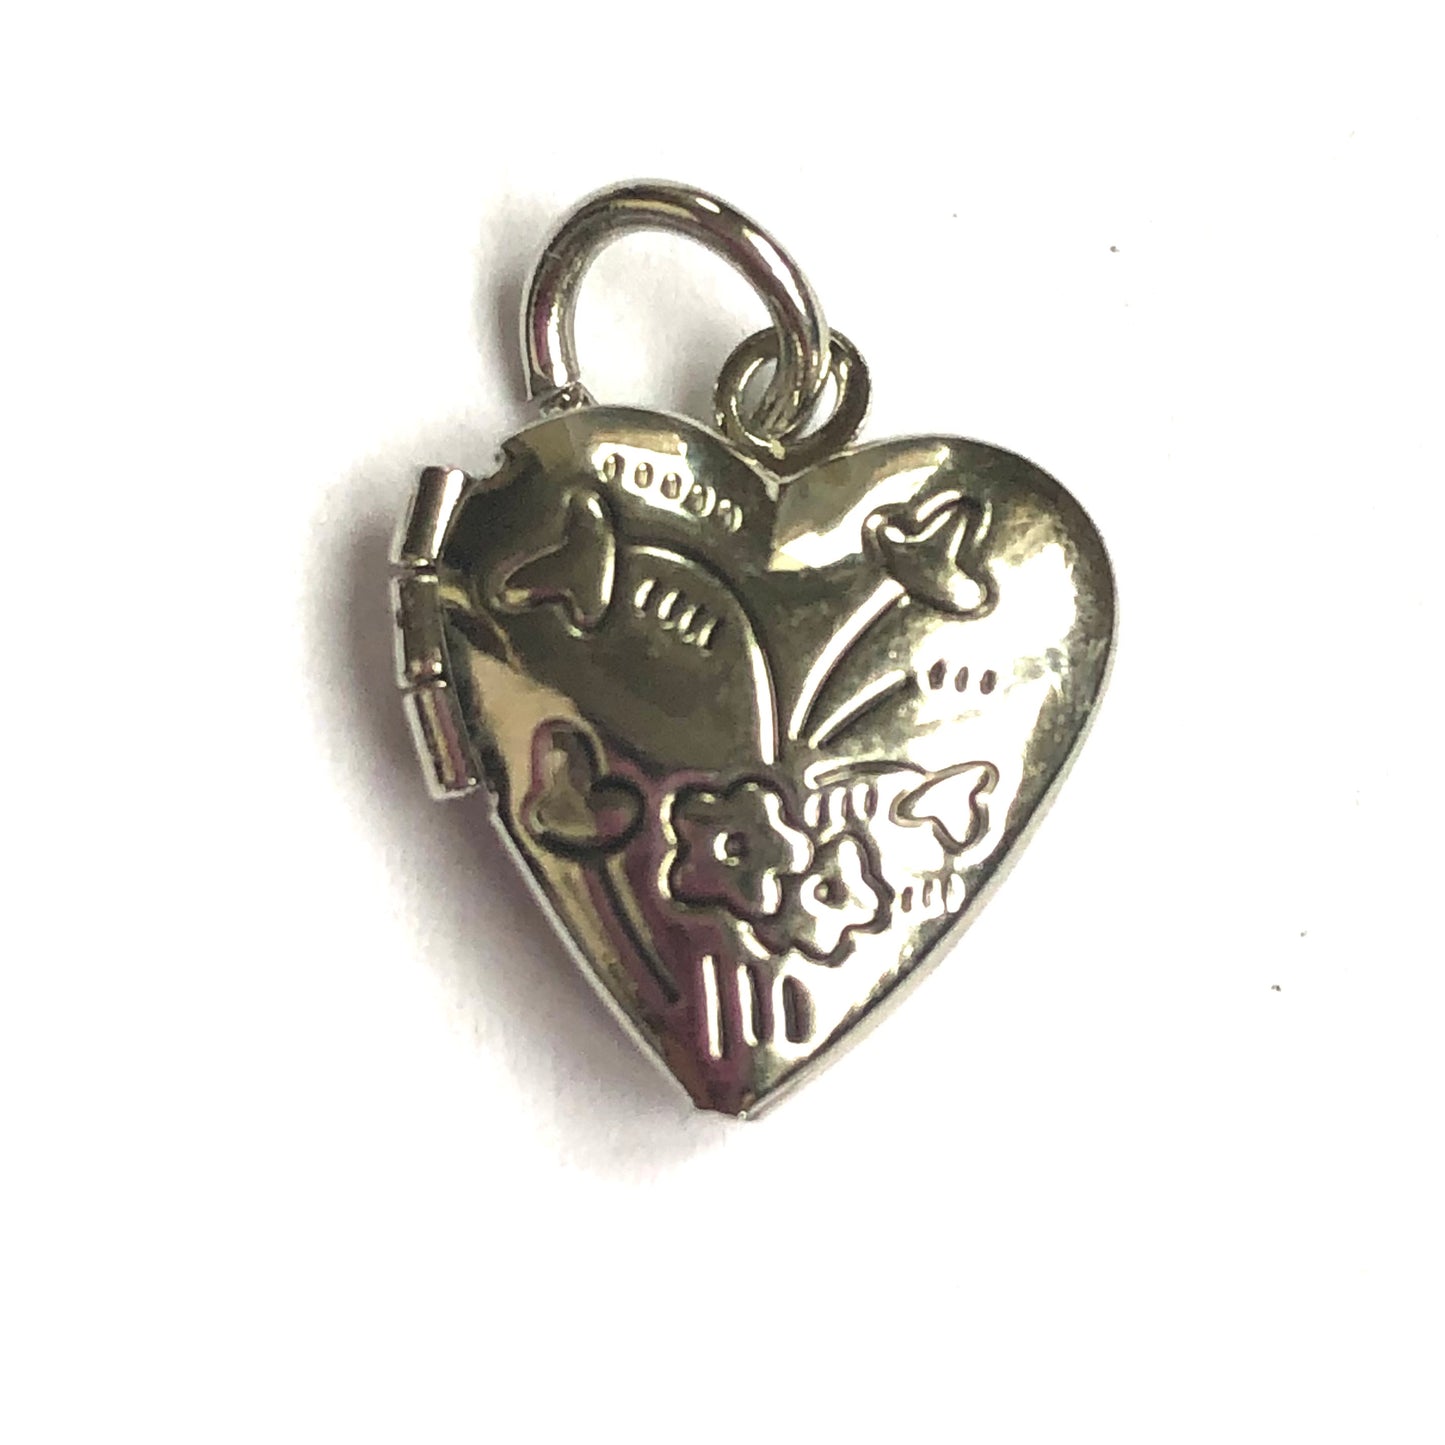 Close-up of a heart-shaped locket engraved with flowers.